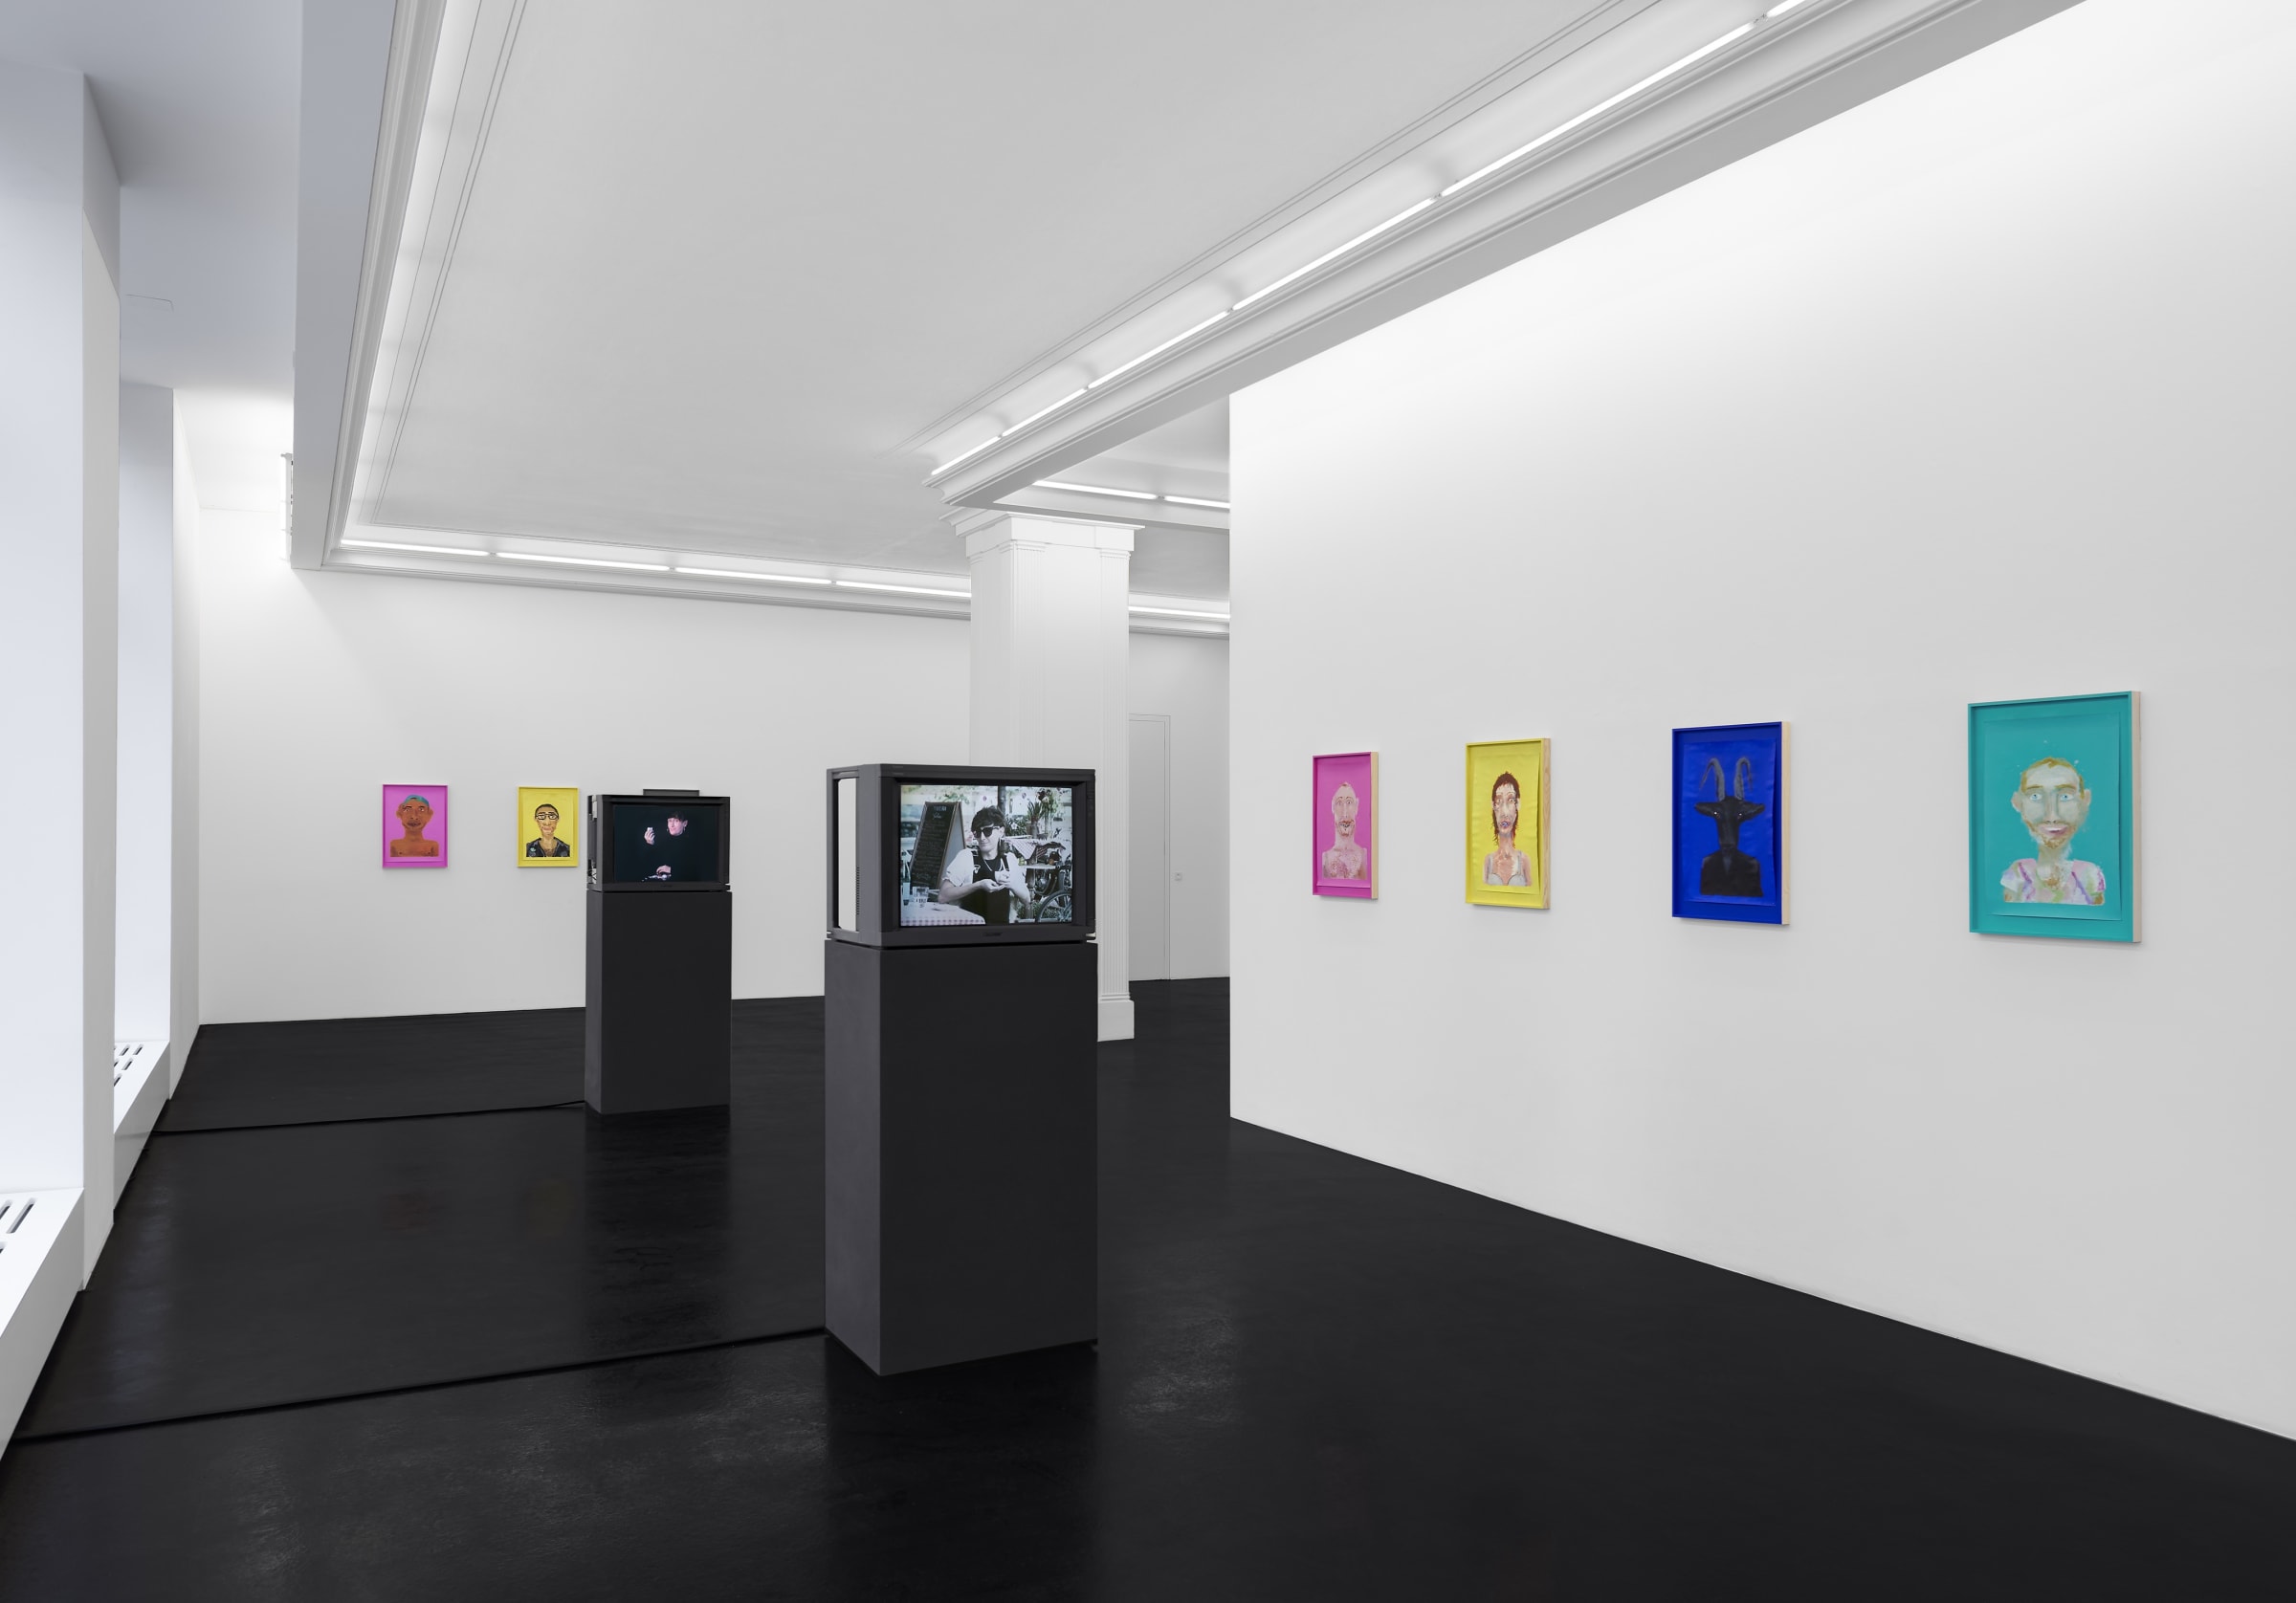 Manuel Solano Portraits Installation View September 13 – October 25, 2019 Peres Projects, Berlin Photographed by: Matthias Kolb